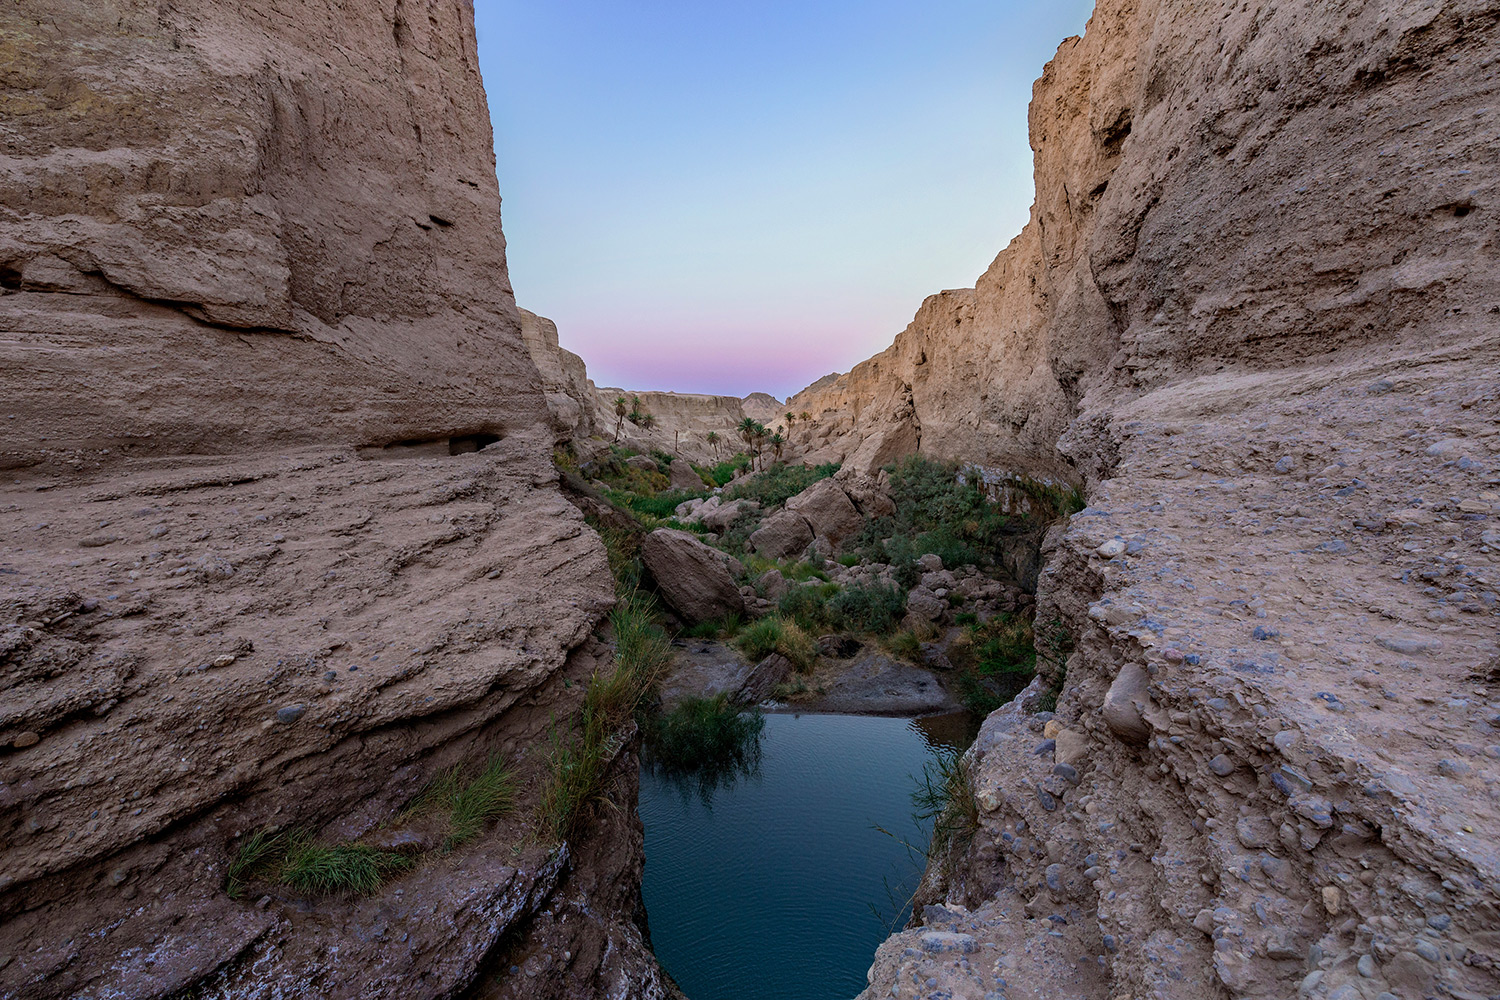 Watery valley in the heart of the desert